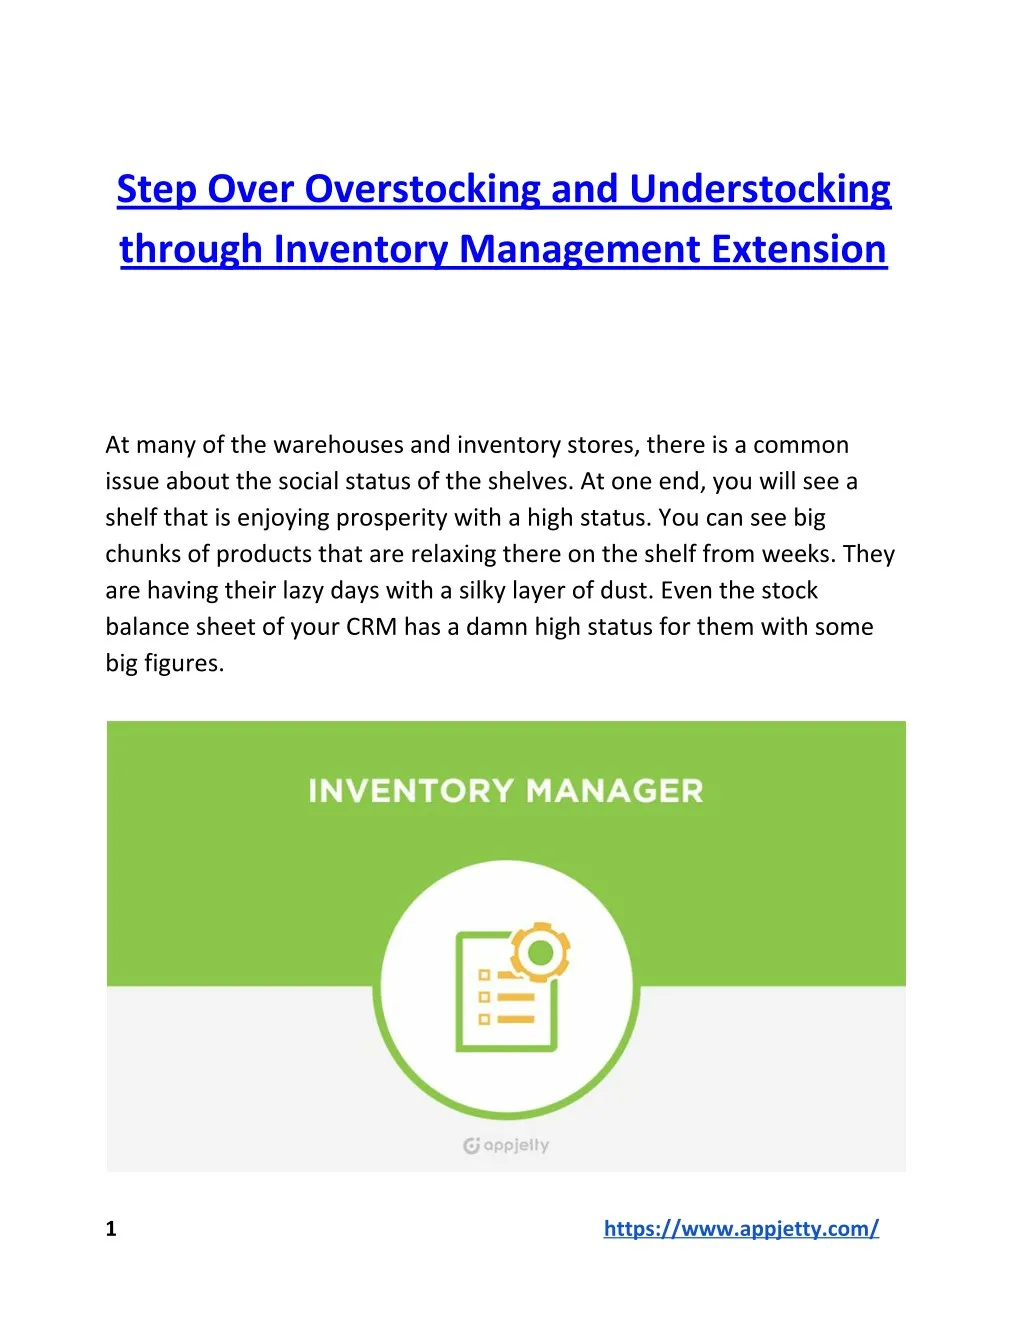 PPT - Step Over Overstocking and Understocking through Inventory ...